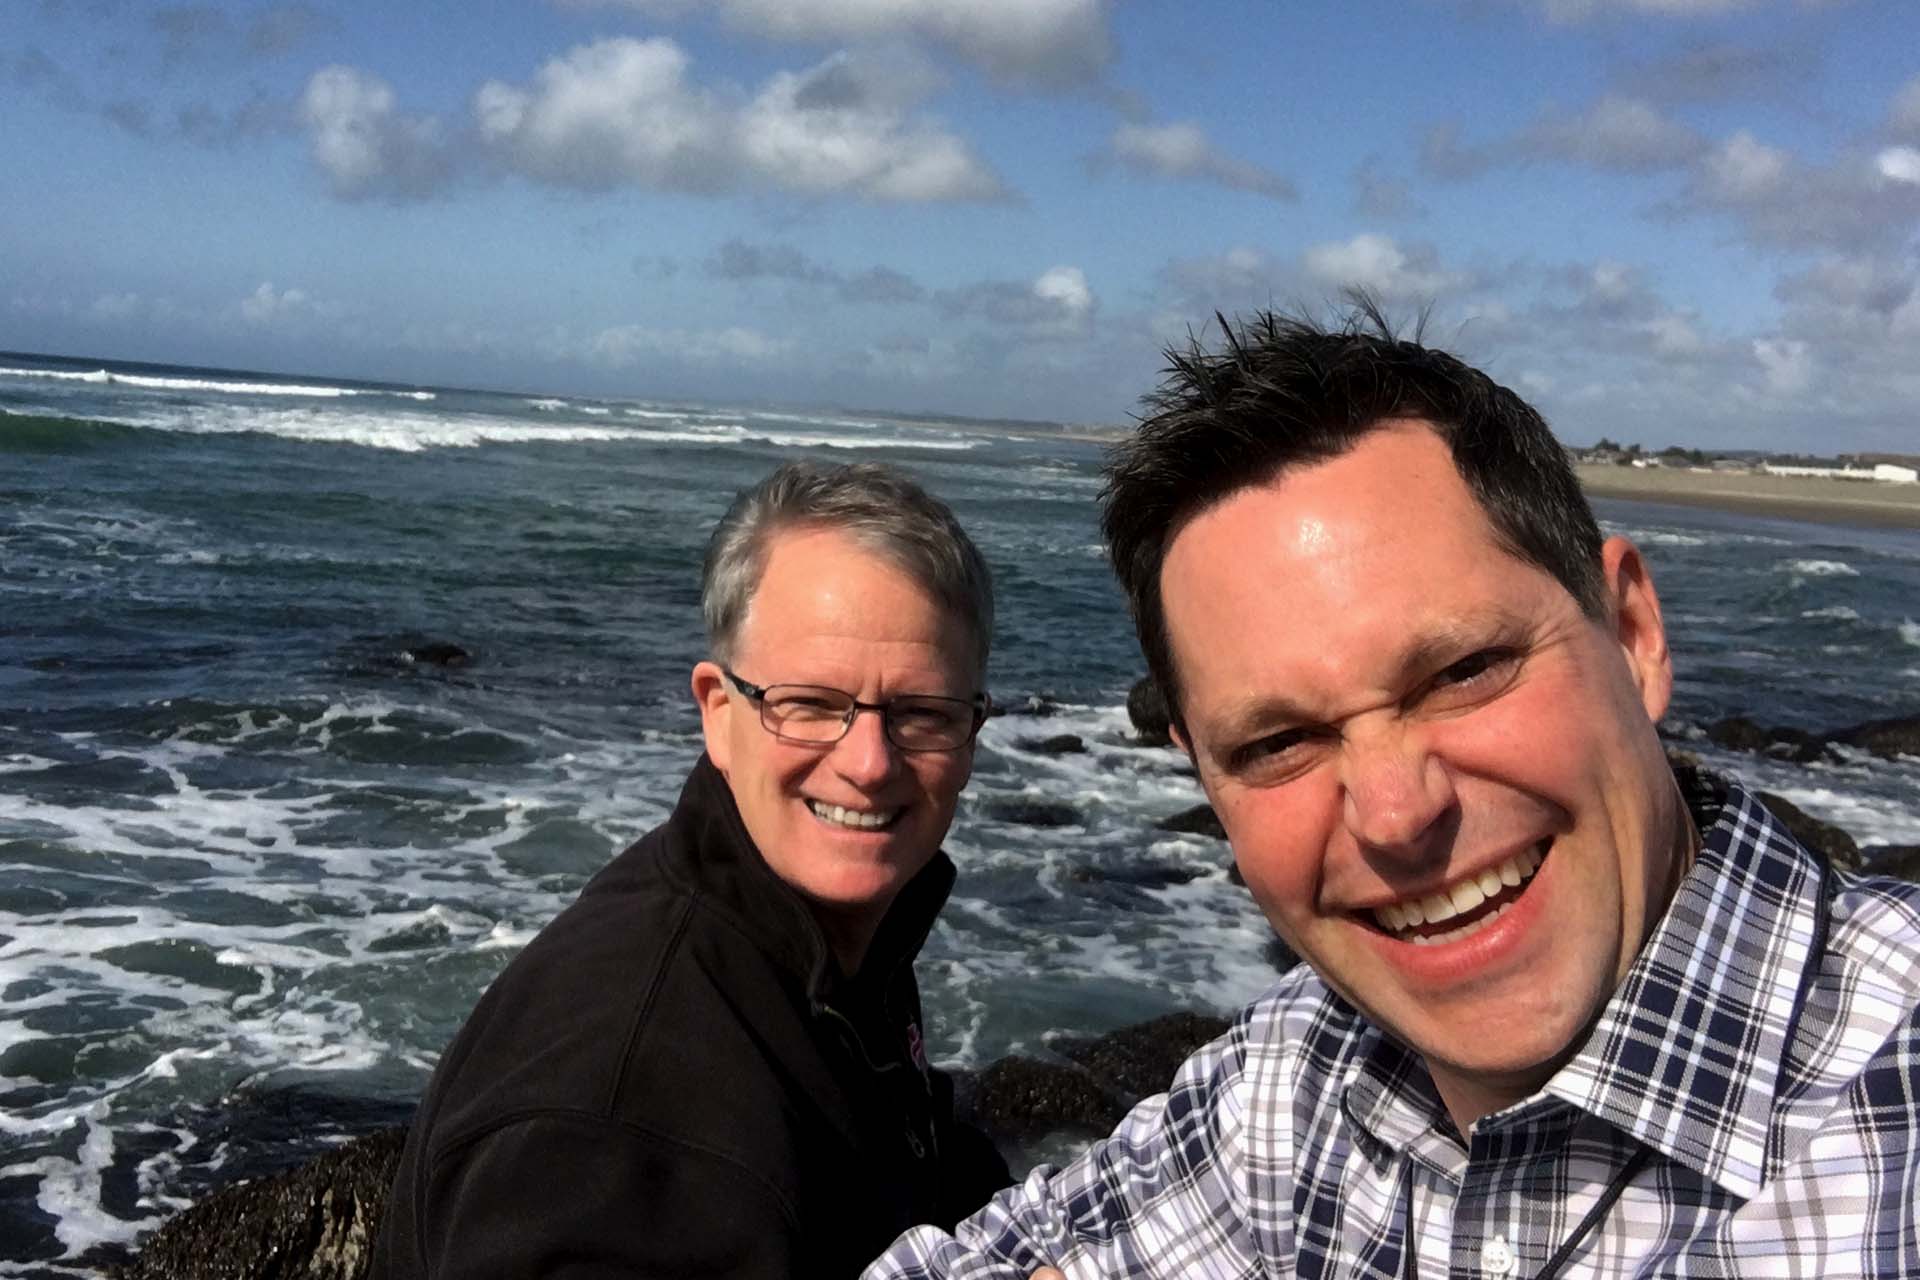 Jeff Fortenbacher and Rick Brush explore the Oregon coast at the 2017 Wellville Gathering in Clatsop County, OR